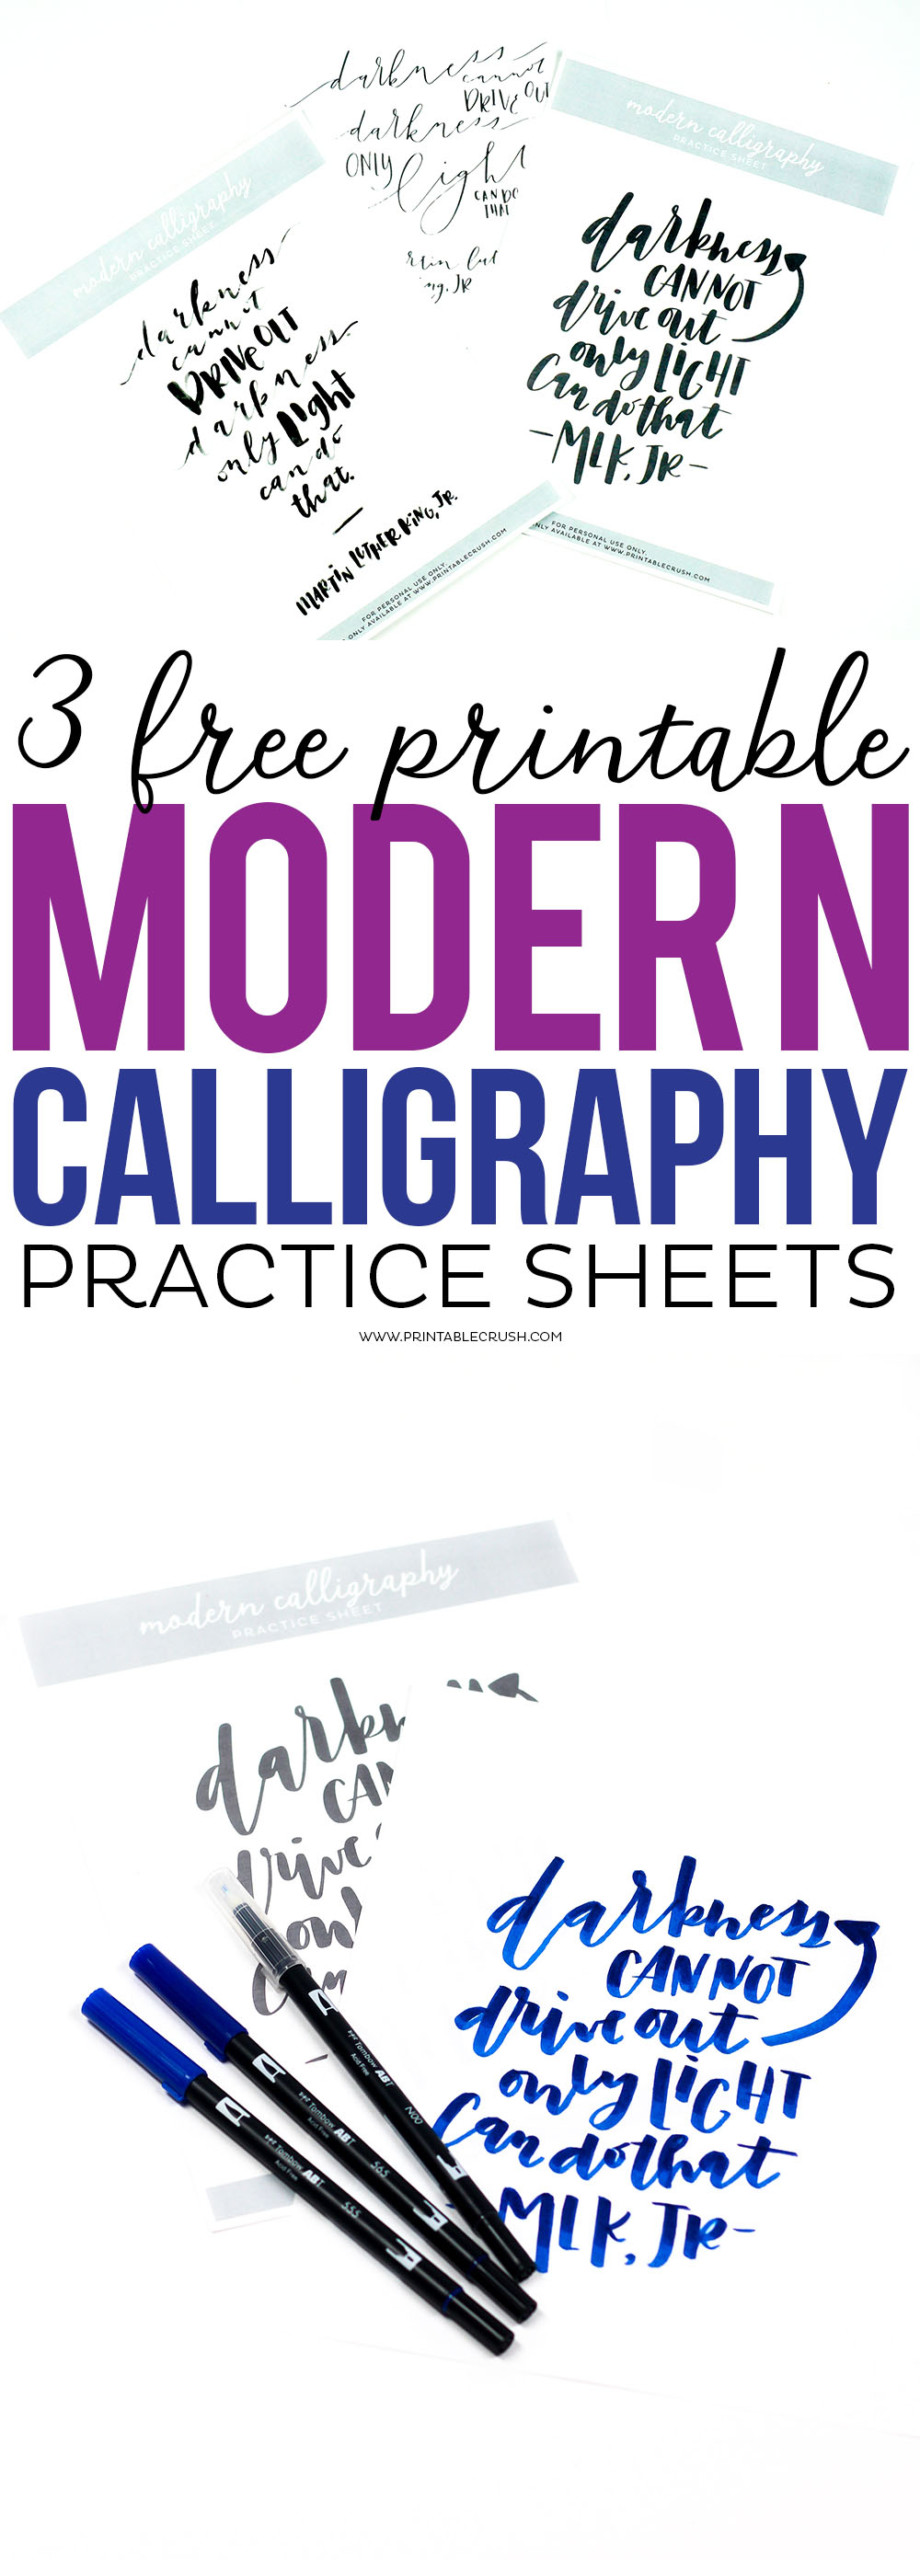 3 Free Printable Modern Calligraphy Practice Sheets 